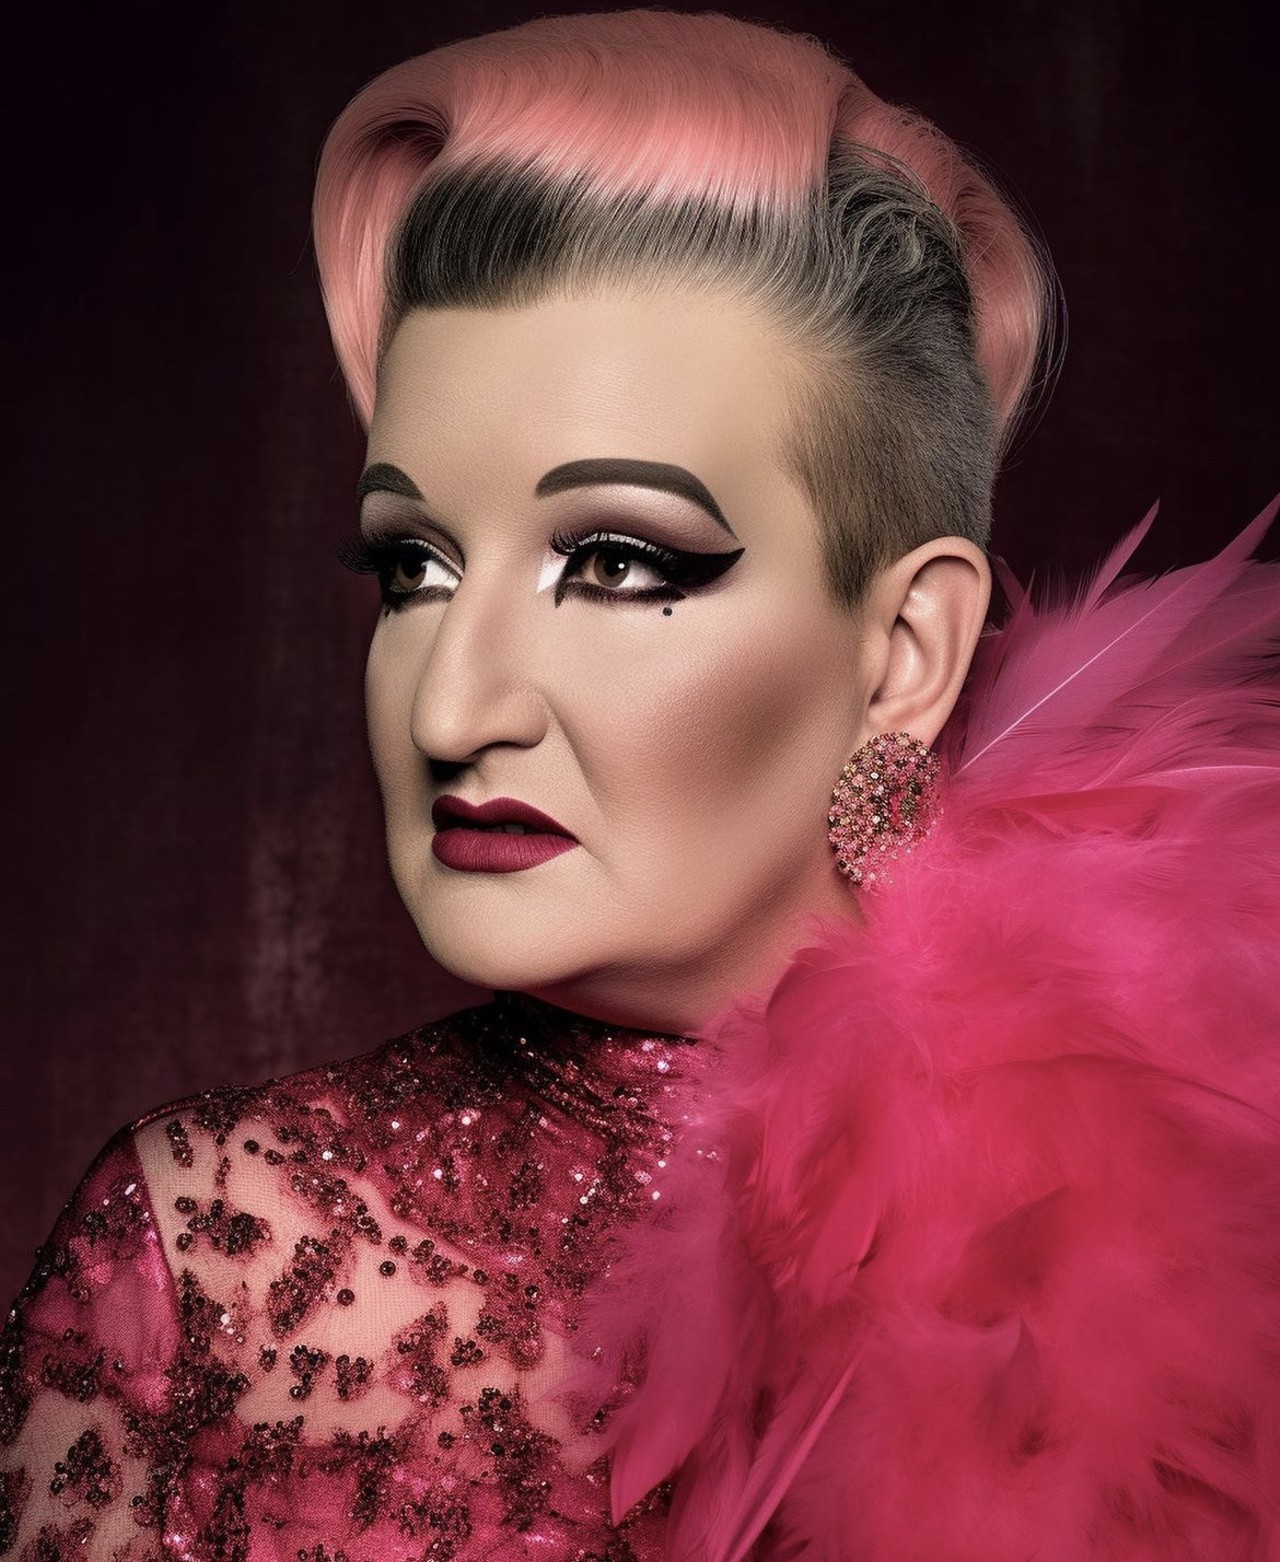  Ted Cruz 
&#147;Cruzella Deville - Serving homophobic realness, she struts her stuff in fur coats lined with family values and defends every fetus and every gun, every day, heeeennnyyyy. #rupublicans #tedcruz&#148; 